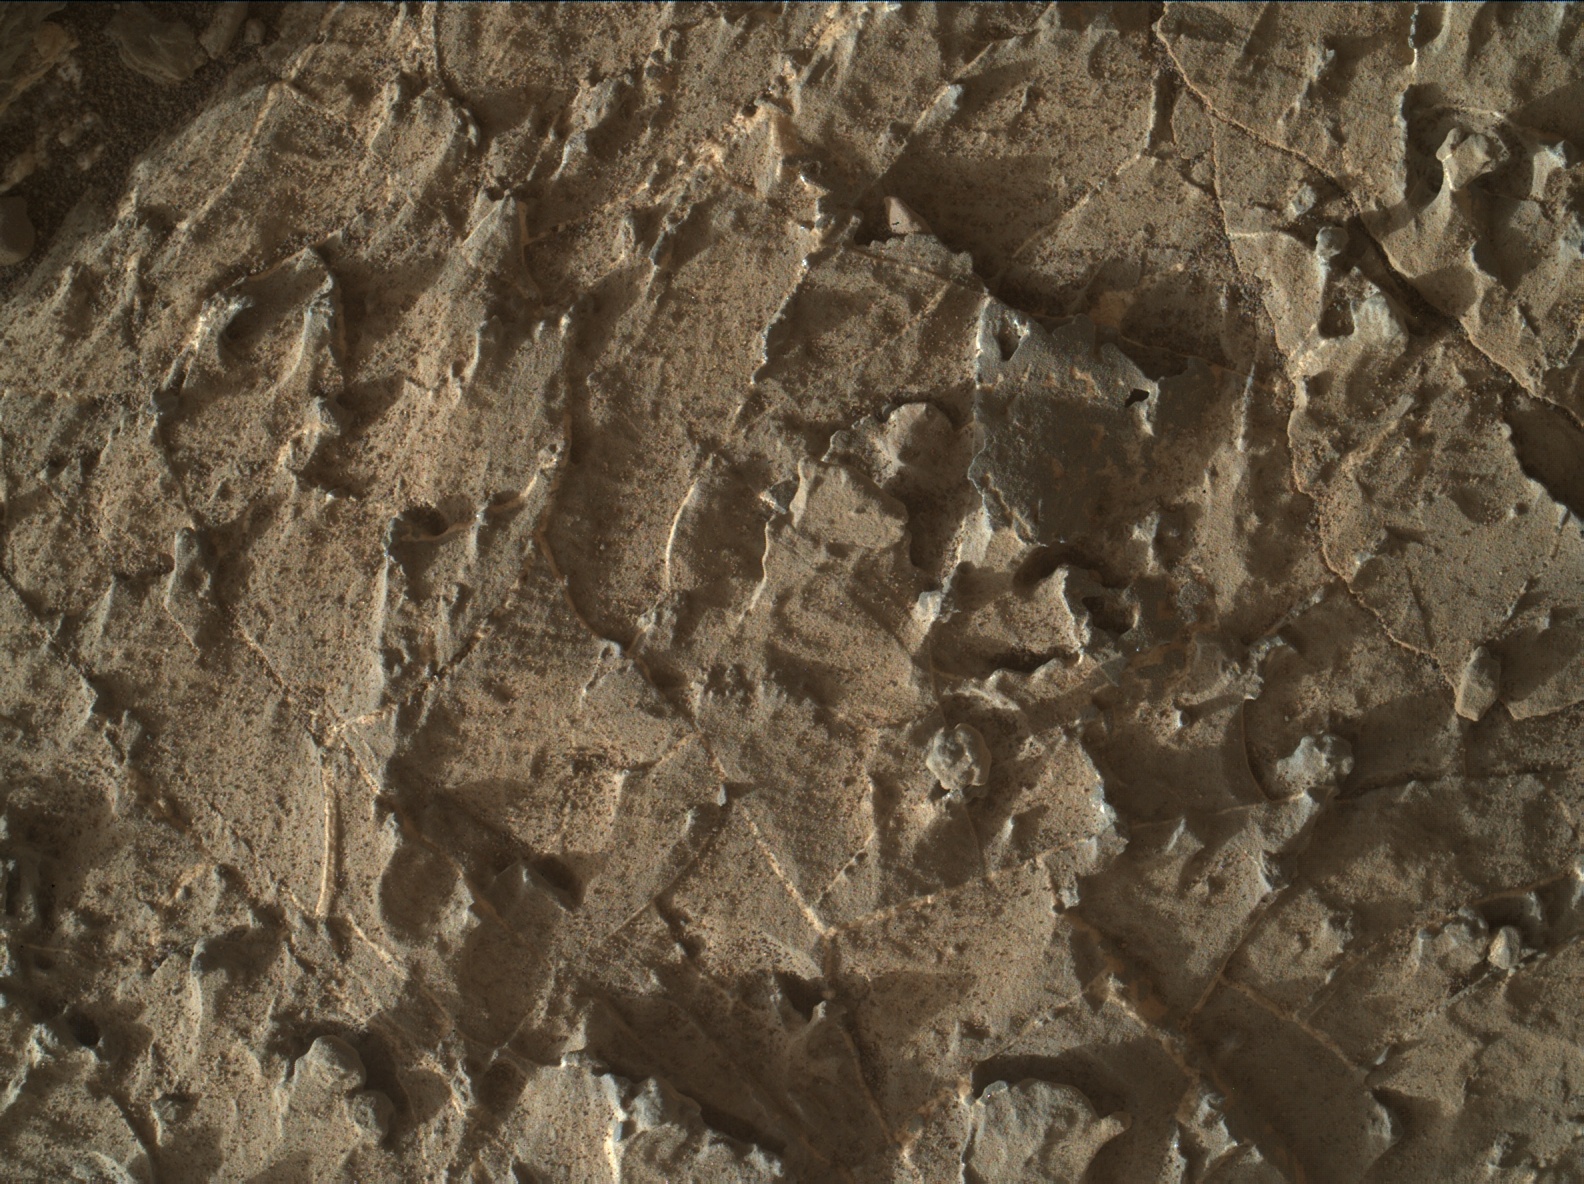 Nasa's Mars rover Curiosity acquired this image using its Mars Hand Lens Imager (MAHLI) on Sol 1937